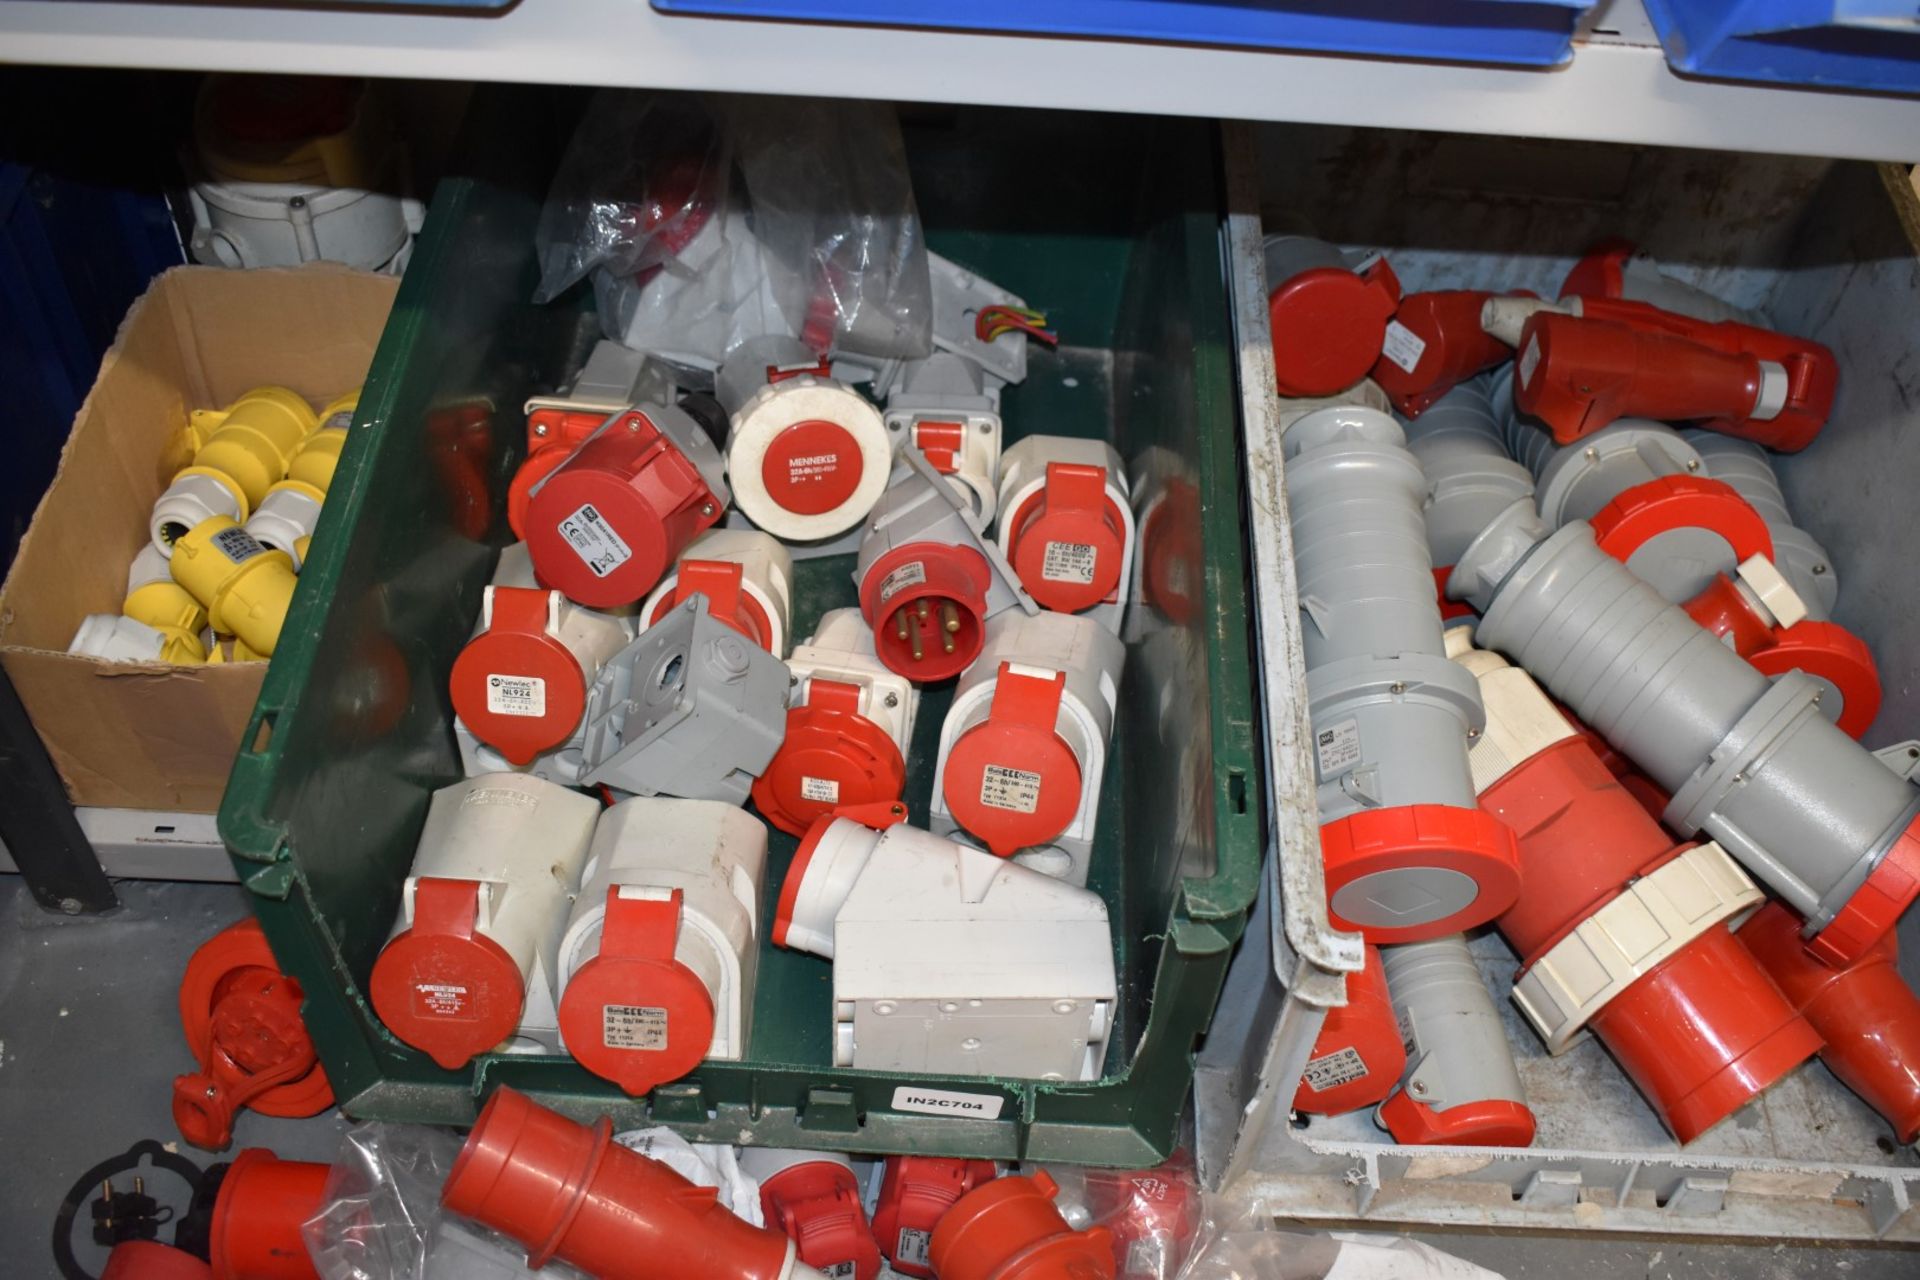 4 x Linbins With Contents - Includes Large Quantity of Industrial 3 Phase Plugs / Sockets - Image 7 of 17